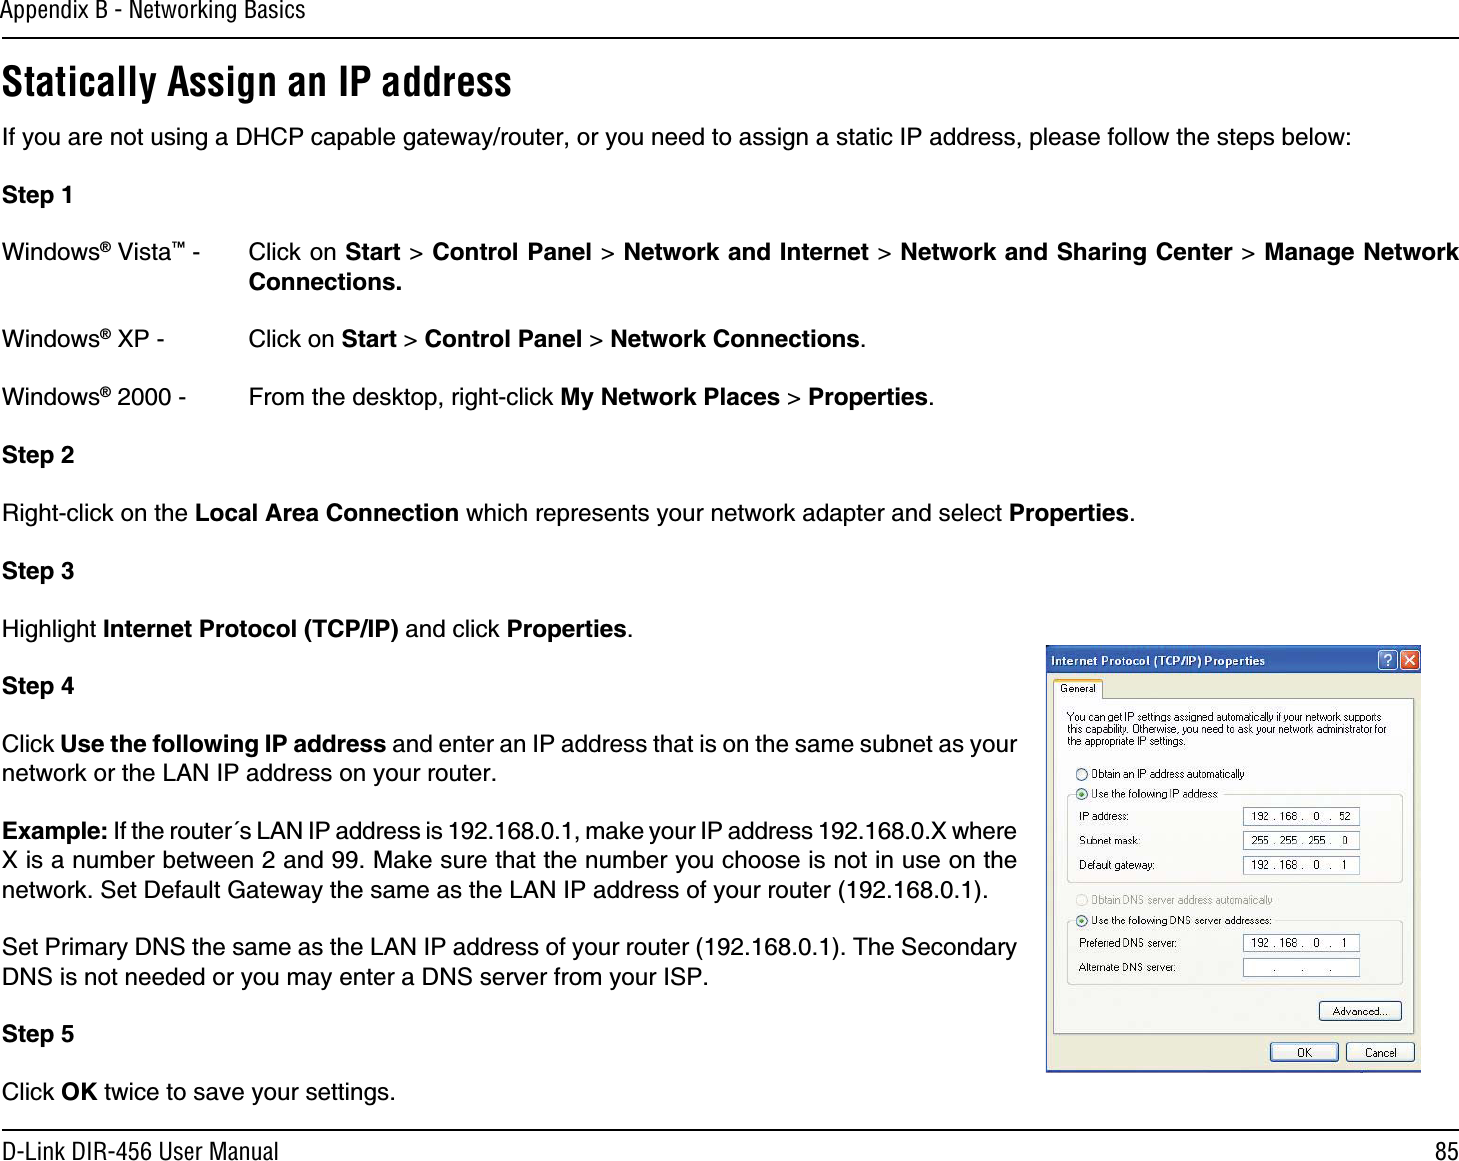 85D-Link DIR-456 User ManualAppendix B - Networking BasicsStatically Assign an IP addressIf you are not using a DHCP capable gateway/router, or you need to assign a static IP address, please follow the steps below:Step 1Windows® Vista™ -  Click on Start &gt; Control Panel &gt; Network and Internet &gt; Network and Sharing Center &gt; Manage Network Connections.Windows® XP -  Click on Start &gt; Control Panel &gt; Network Connections.Windows® 2000 -  From the desktop, right-click My Network Places &gt; Properties.Step 2Right-click on the Local Area Connection which represents your network adapter and select Properties.Step 3Highlight Internet Protocol (TCP/IP) and click Properties.Step 4Click Use the following IP address and enter an IP address that is on the same subnet as your network or the LAN IP address on your router. Example: If the router´s LAN IP address is 192.168.0.1, make your IP address 192.168.0.X where X is a number between 2 and 99. Make sure that the number you choose is not in use on the network. Set Default Gateway the same as the LAN IP address of your router (192.168.0.1). Set Primary DNS the same as the LAN IP address of your router (192.168.0.1). The Secondary DNS is not needed or you may enter a DNS server from your ISP.Step 5Click OK twice to save your settings.